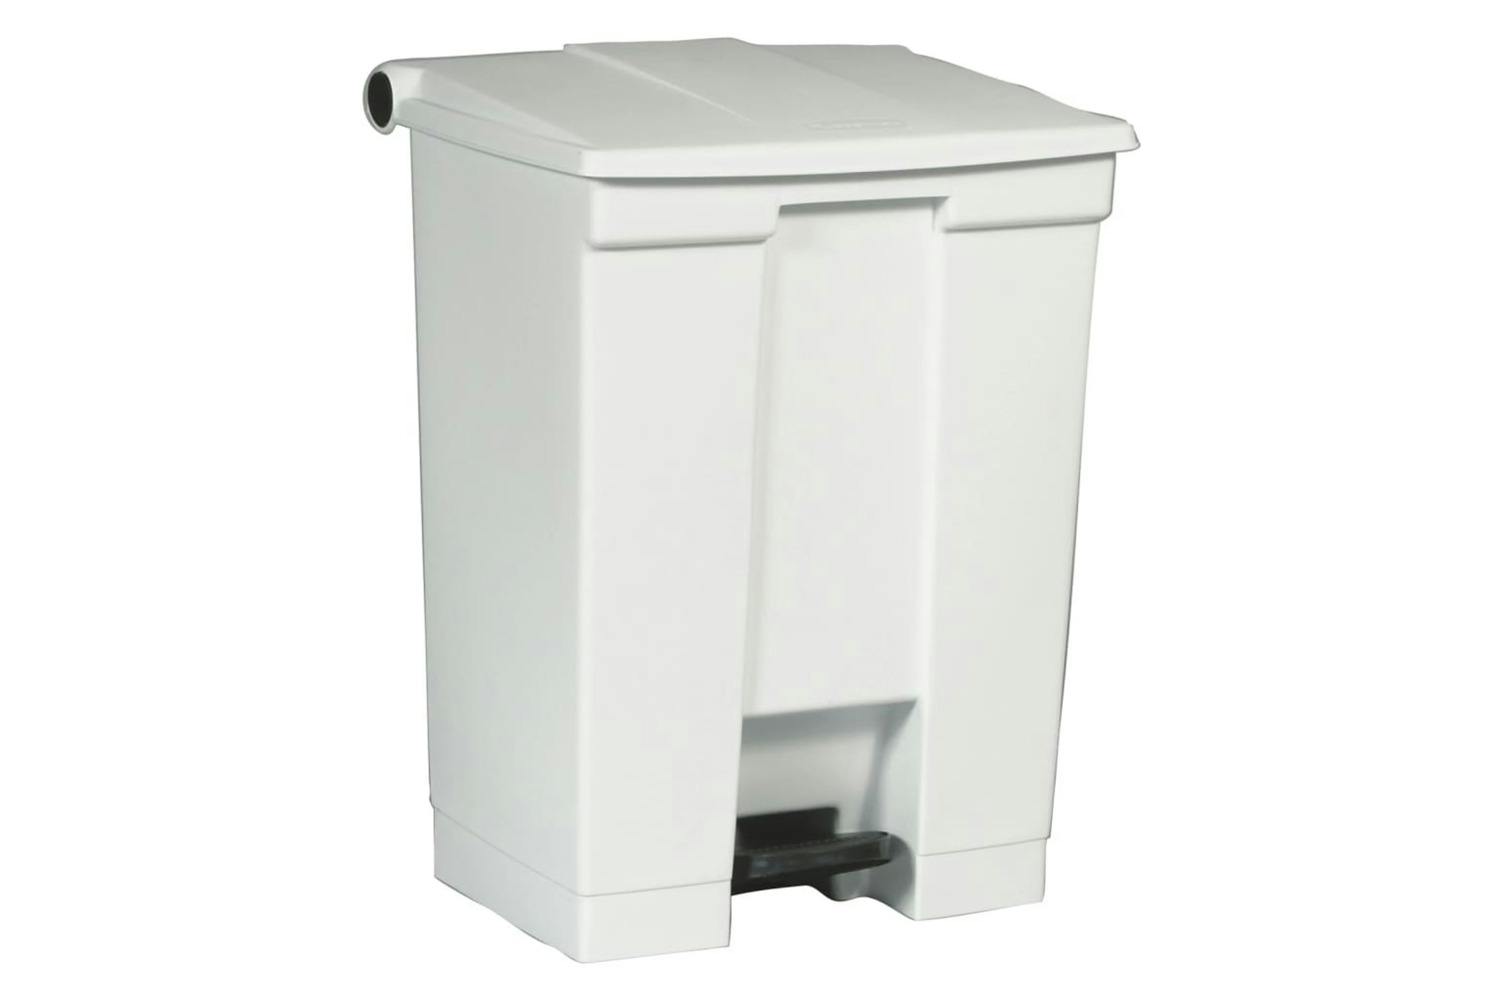 Rubbermaid Step-on Classic Container 68.1 L White